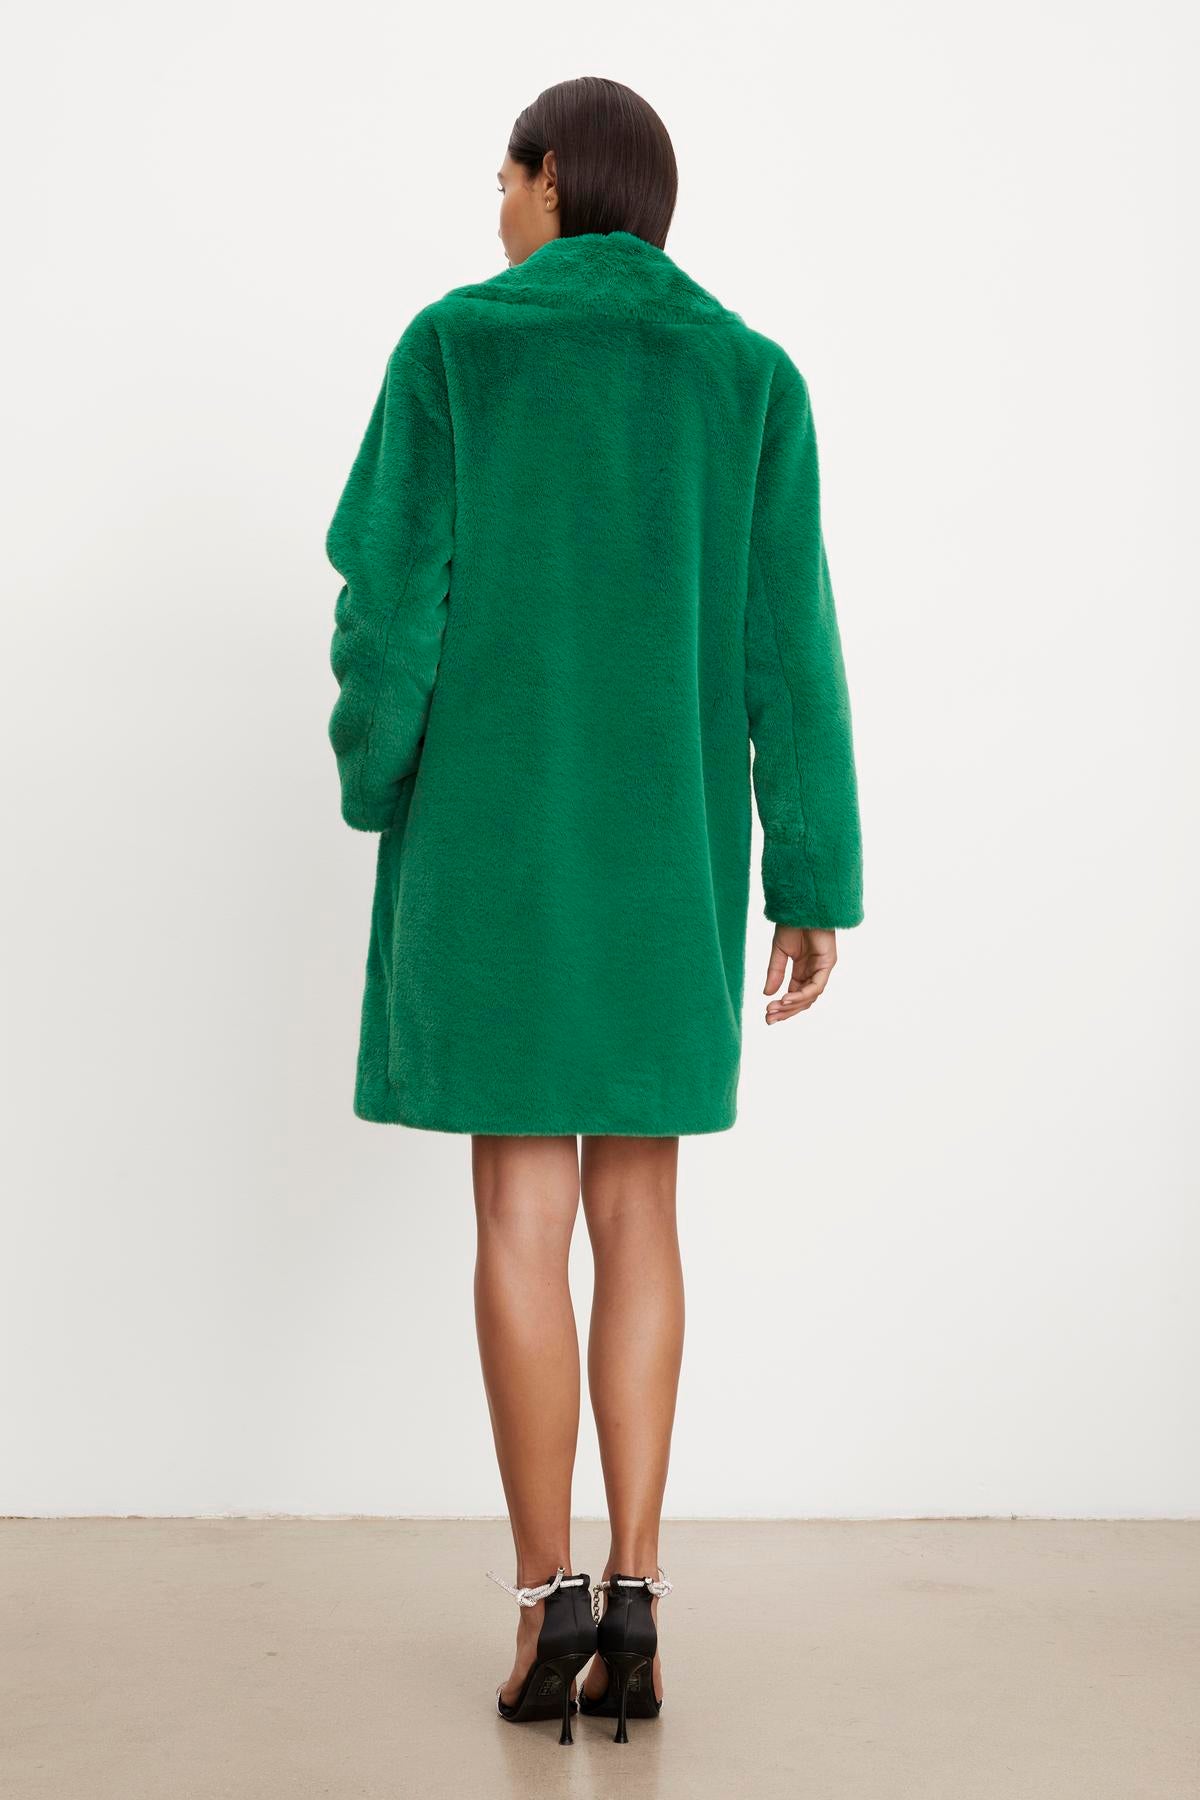 The silhouette of a woman in an EVALYN LUX FAUX FUR COAT by Velvet by Graham & Spencer.-35624128446657